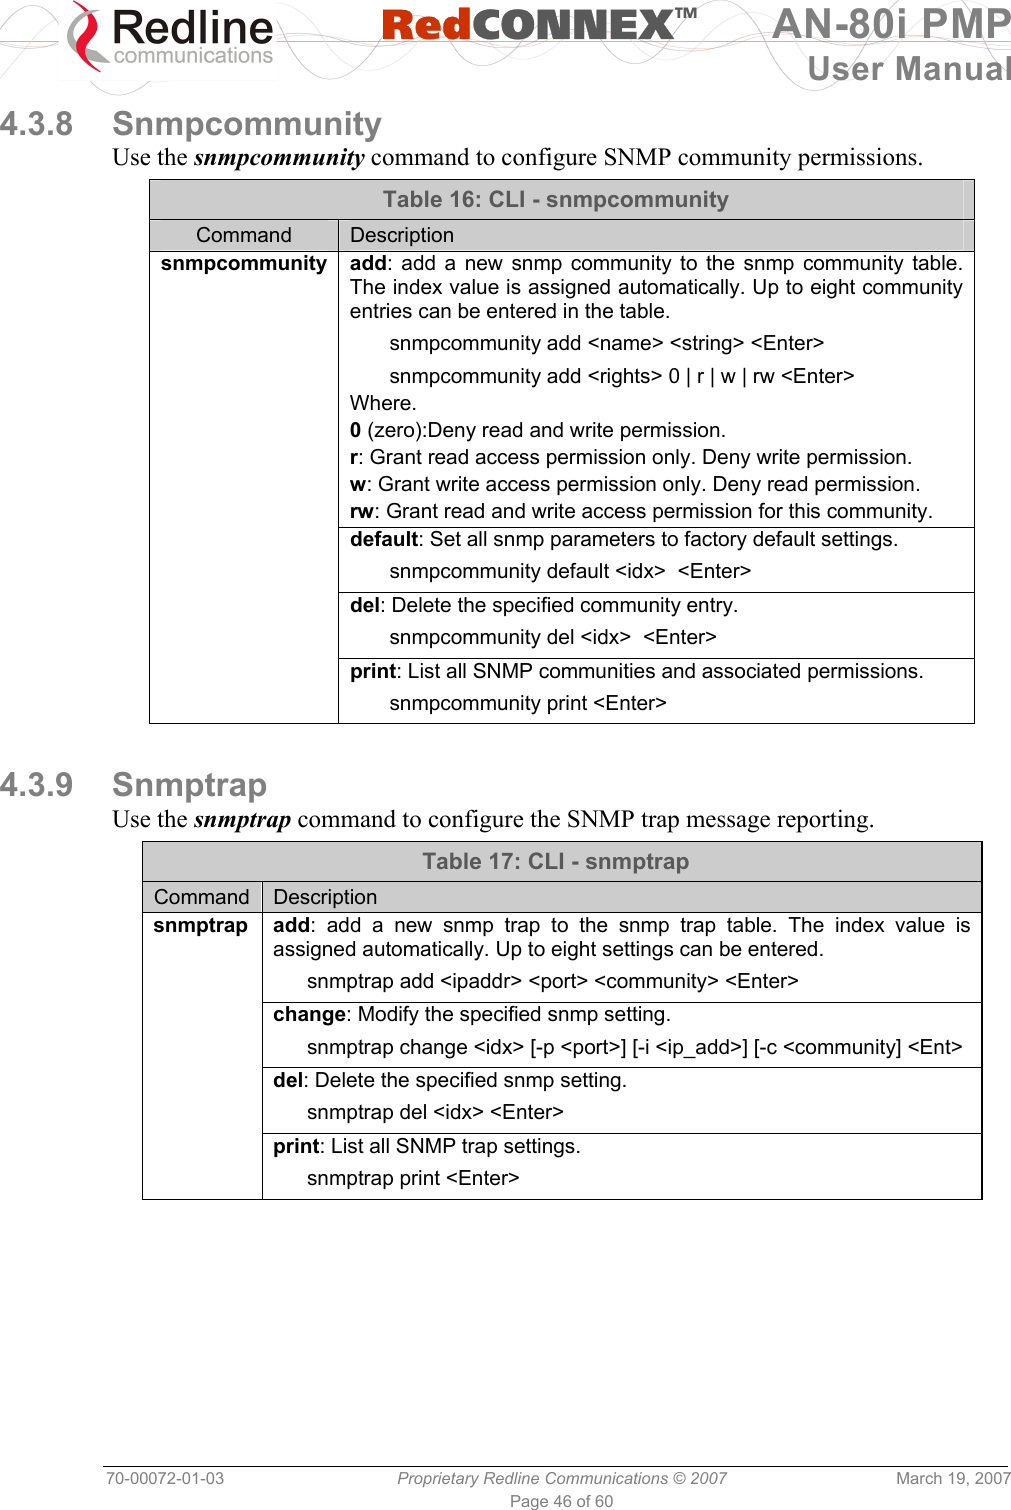   RedCONNEXTM AN-80i PMP User Manual 70-00072-01-03  Proprietary Redline Communications © 2007  March 19, 2007 Page 46 of 60  4.3.8 Snmpcommunity Use the snmpcommunity command to configure SNMP community permissions. Table 16: CLI - snmpcommunity Command  Description snmpcommunity add: add a new snmp community to the snmp community table. The index value is assigned automatically. Up to eight community entries can be entered in the table.   snmpcommunity add &lt;name&gt; &lt;string&gt; &lt;Enter&gt;   snmpcommunity add &lt;rights&gt; 0 | r | w | rw &lt;Enter&gt; Where. 0 (zero):Deny read and write permission. r: Grant read access permission only. Deny write permission. w: Grant write access permission only. Deny read permission. rw: Grant read and write access permission for this community.  default: Set all snmp parameters to factory default settings.   snmpcommunity default &lt;idx&gt;  &lt;Enter&gt;  del: Delete the specified community entry.   snmpcommunity del &lt;idx&gt;  &lt;Enter&gt;  print: List all SNMP communities and associated permissions.   snmpcommunity print &lt;Enter&gt;  4.3.9 Snmptrap Use the snmptrap command to configure the SNMP trap message reporting. Table 17: CLI - snmptrap Command  Description snmptrap add: add a new snmp trap to the snmp trap table. The index value is assigned automatically. Up to eight settings can be entered.   snmptrap add &lt;ipaddr&gt; &lt;port&gt; &lt;community&gt; &lt;Enter&gt;  change: Modify the specified snmp setting.   snmptrap change &lt;idx&gt; [-p &lt;port&gt;] [-i &lt;ip_add&gt;] [-c &lt;community] &lt;Ent&gt;  del: Delete the specified snmp setting.    snmptrap del &lt;idx&gt; &lt;Enter&gt;  print: List all SNMP trap settings.    snmptrap print &lt;Enter&gt;   